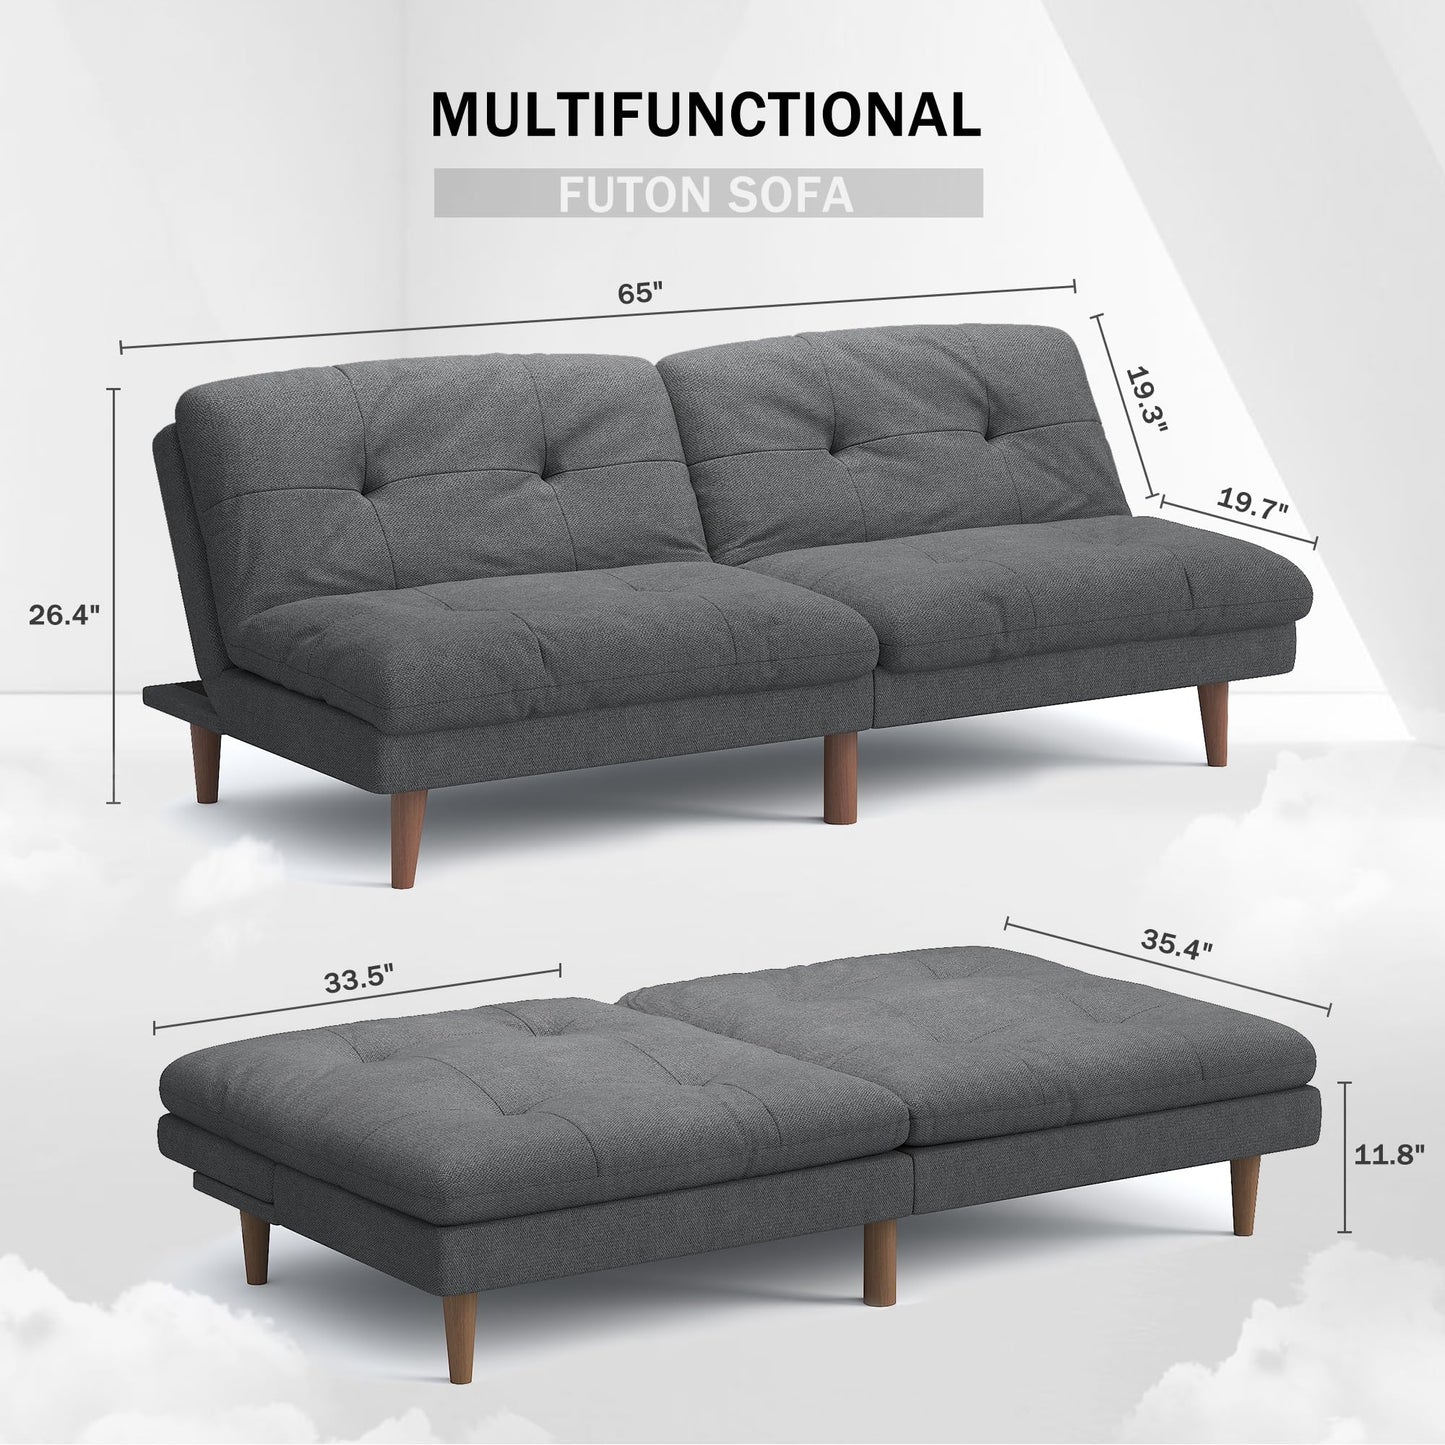 Flamaker Futon Sofa Bed Fabric Couch Adjustable Sleeper Sofa Bed for Small Apartment Modern Convertible Futon Set, Gray